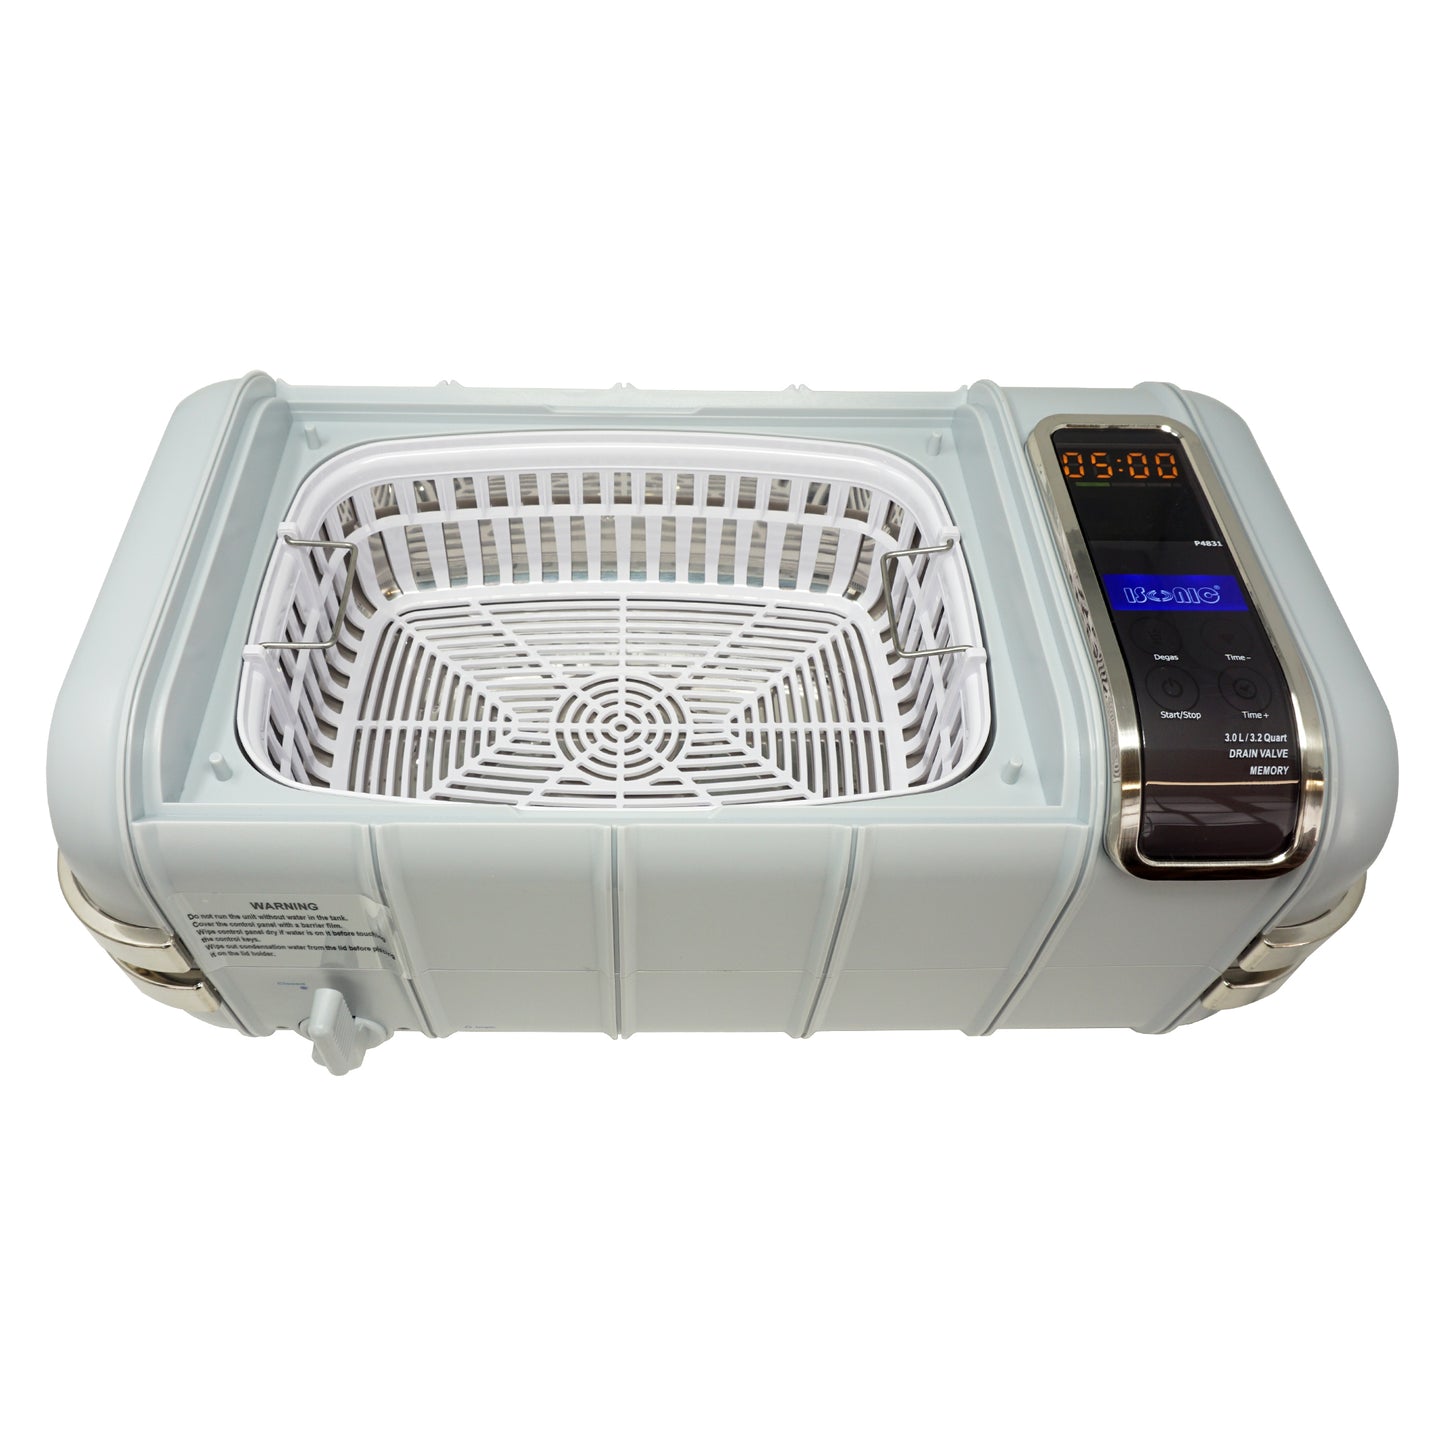 P4831-NH | iSonic® Ultrasonic Cleaner for Dental, Veterinary, Tattoo & Piercing, Surgical & Other Medical Applications, 3.2Qt/3L, ss. basket included